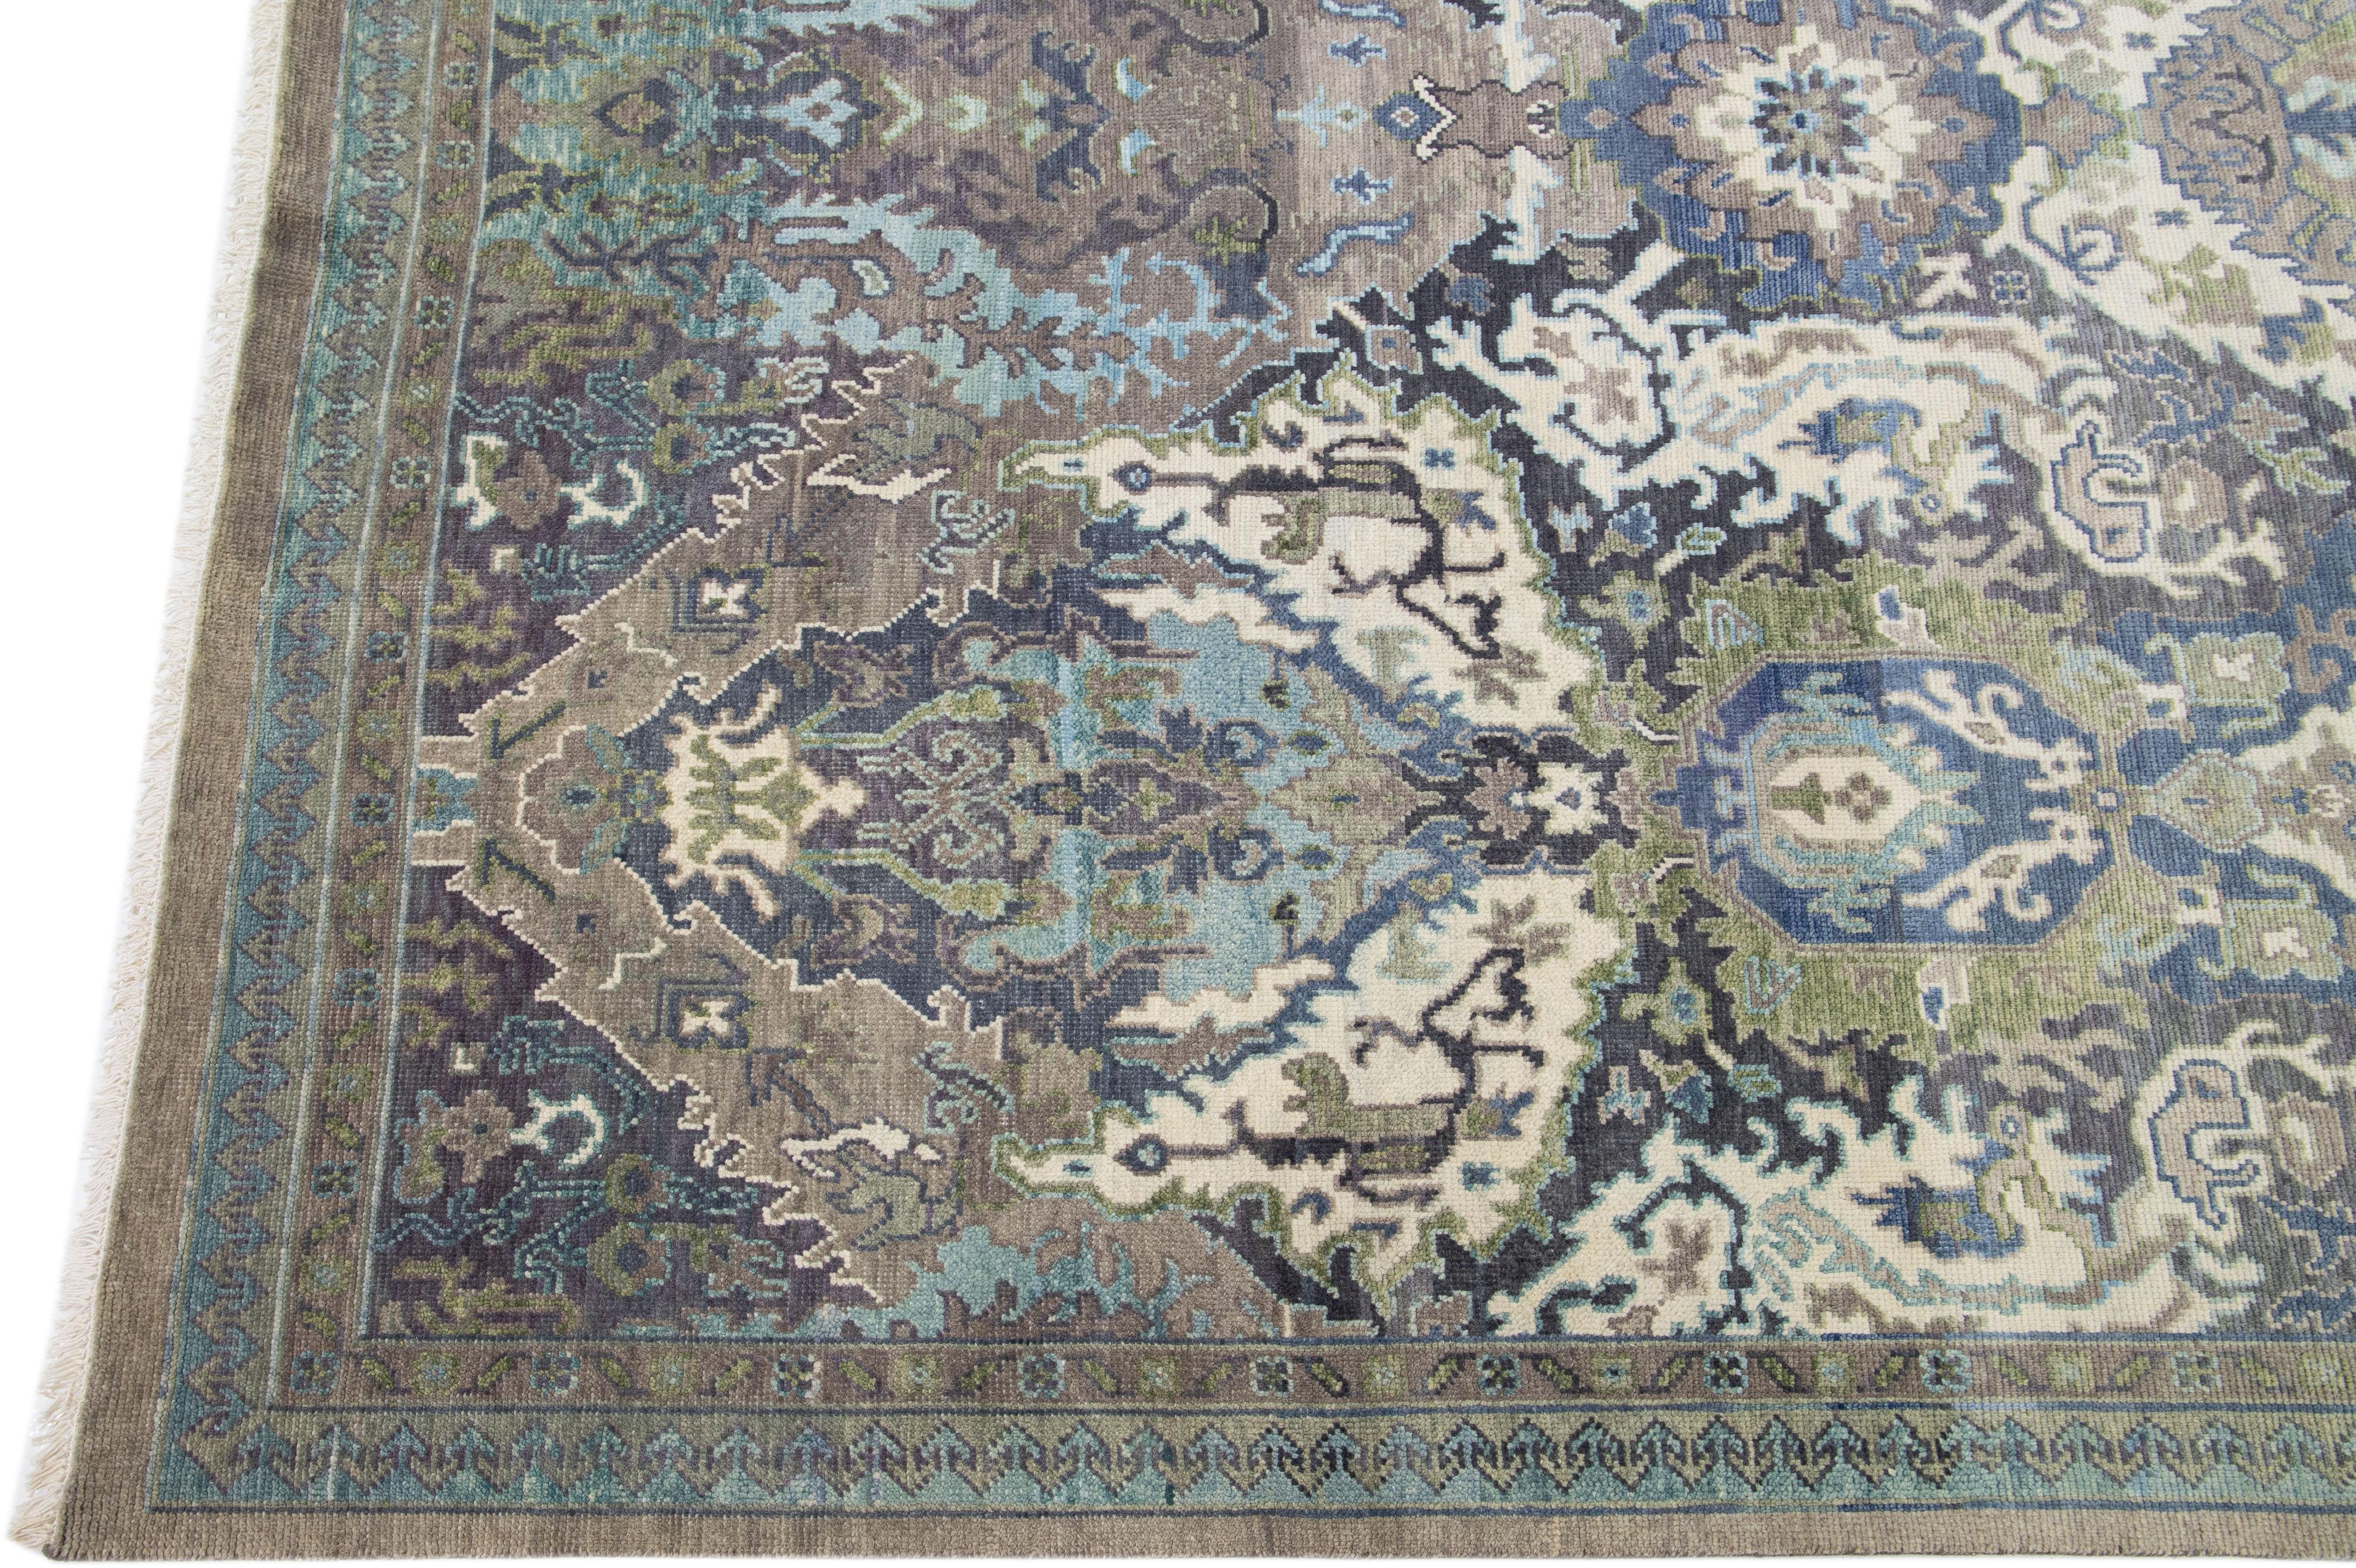 Beautiful modern Oushak hand-knotted wool rug with a gray field. This Turkish rug has a green-designed frame with blue and beige accents in a gorgeous all-over floral pattern design.

This rug measures: 9'11